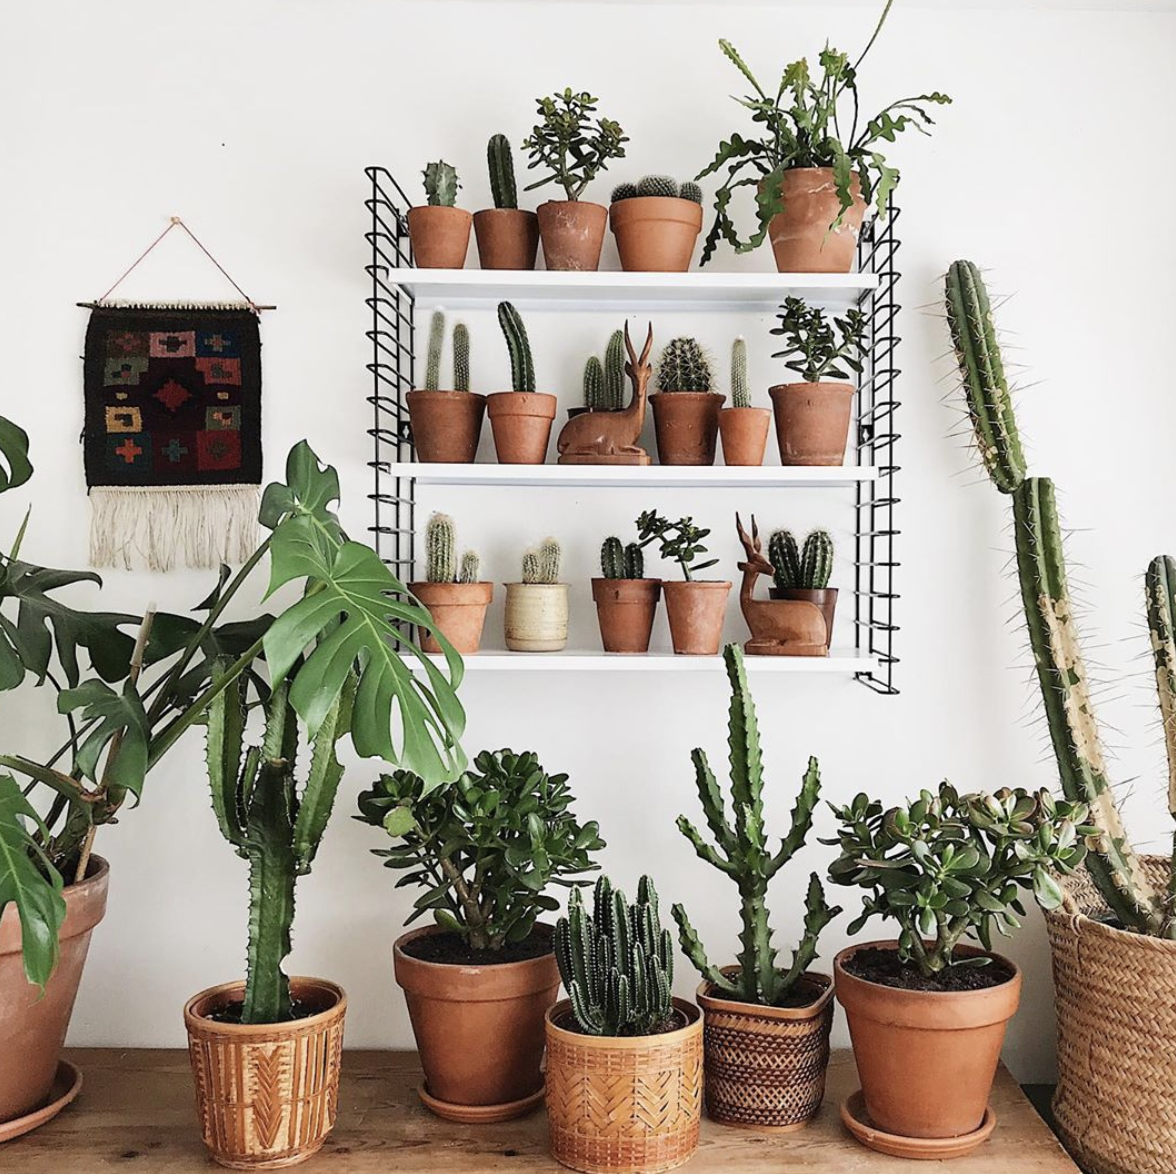 These days there are so many different kinds of pots for your plants. Plastic, ceramic, terracotta, and more! See 3 reasons to use terracotta for your plants. By Clever Bloom #plantcare #terracottapots #terracotta